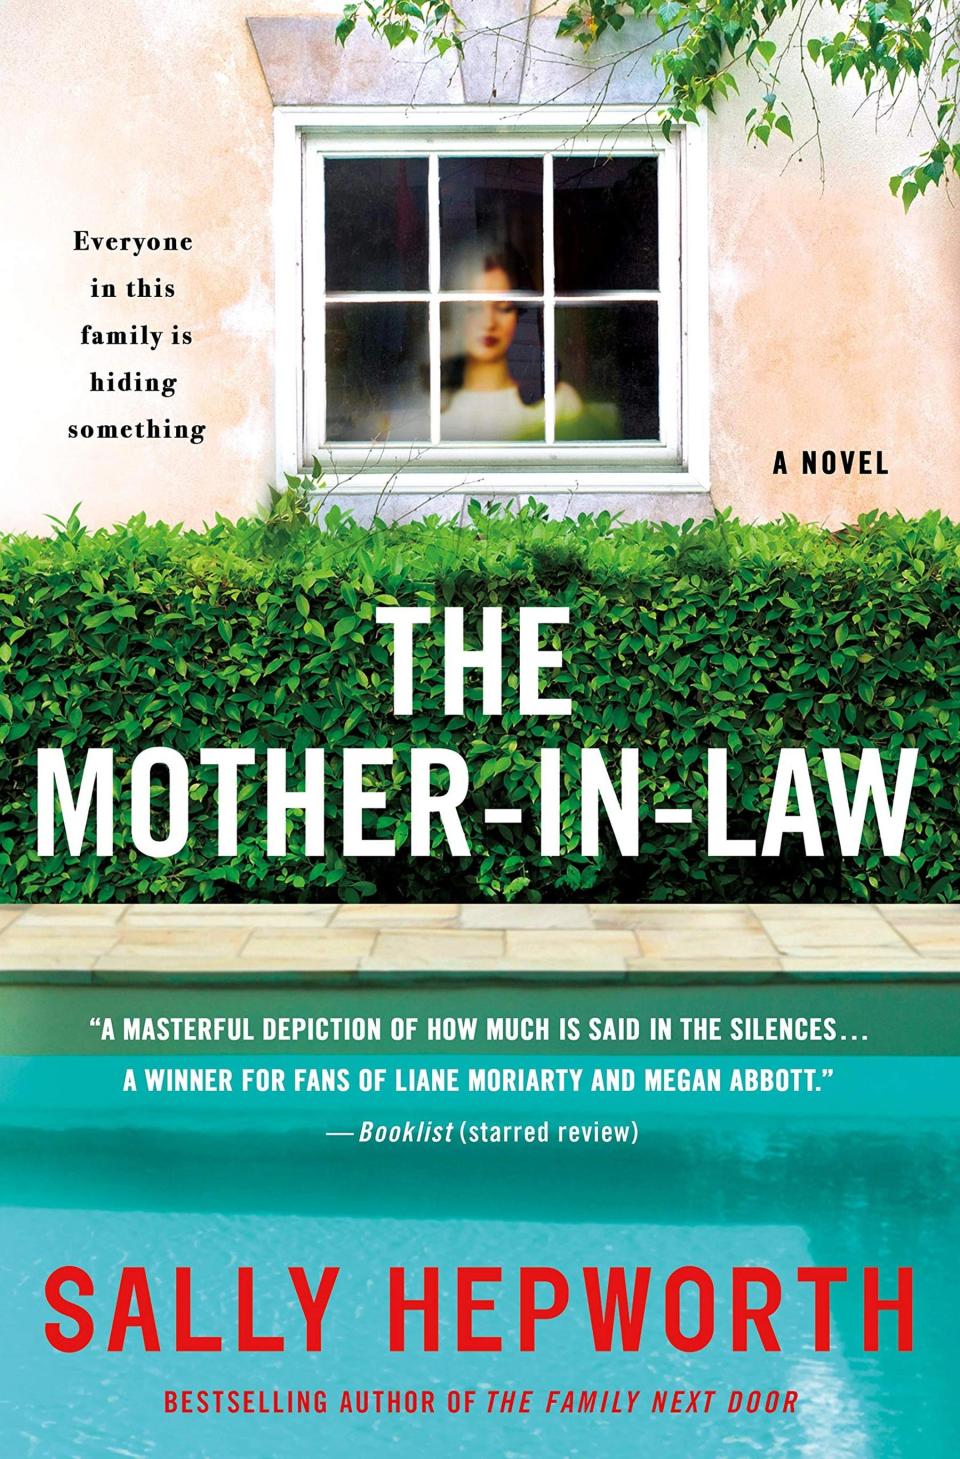 The Mother-in-Law , by Sally Hepworth